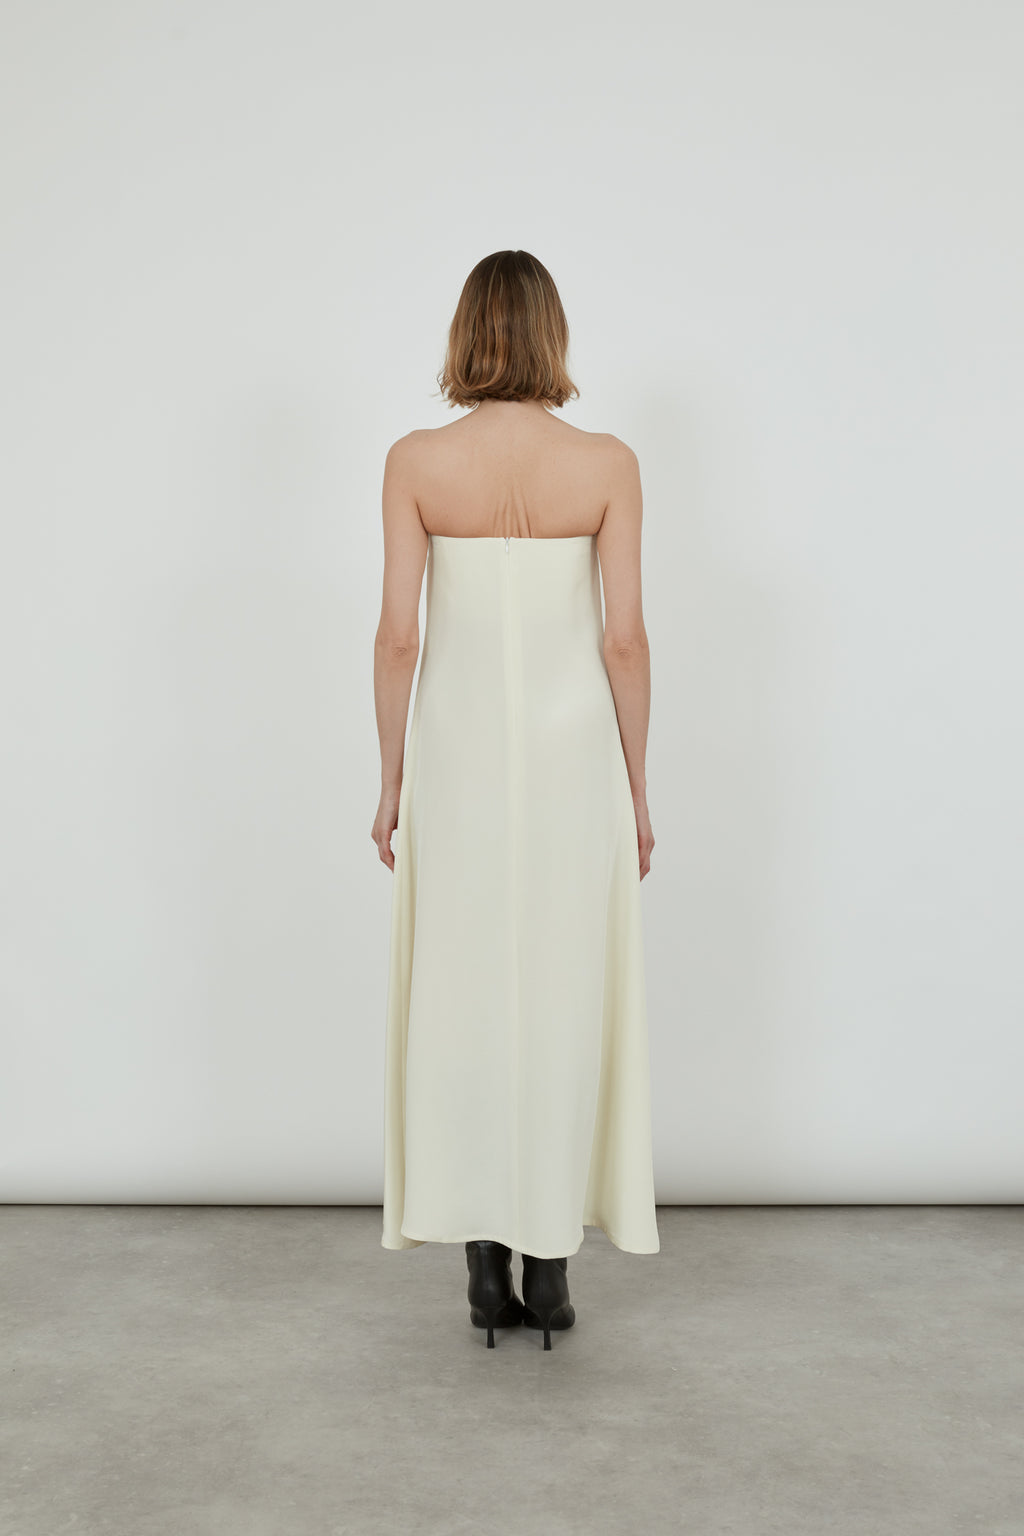 Woman standing with her back to the lens, wearing an off white strapless dress. 